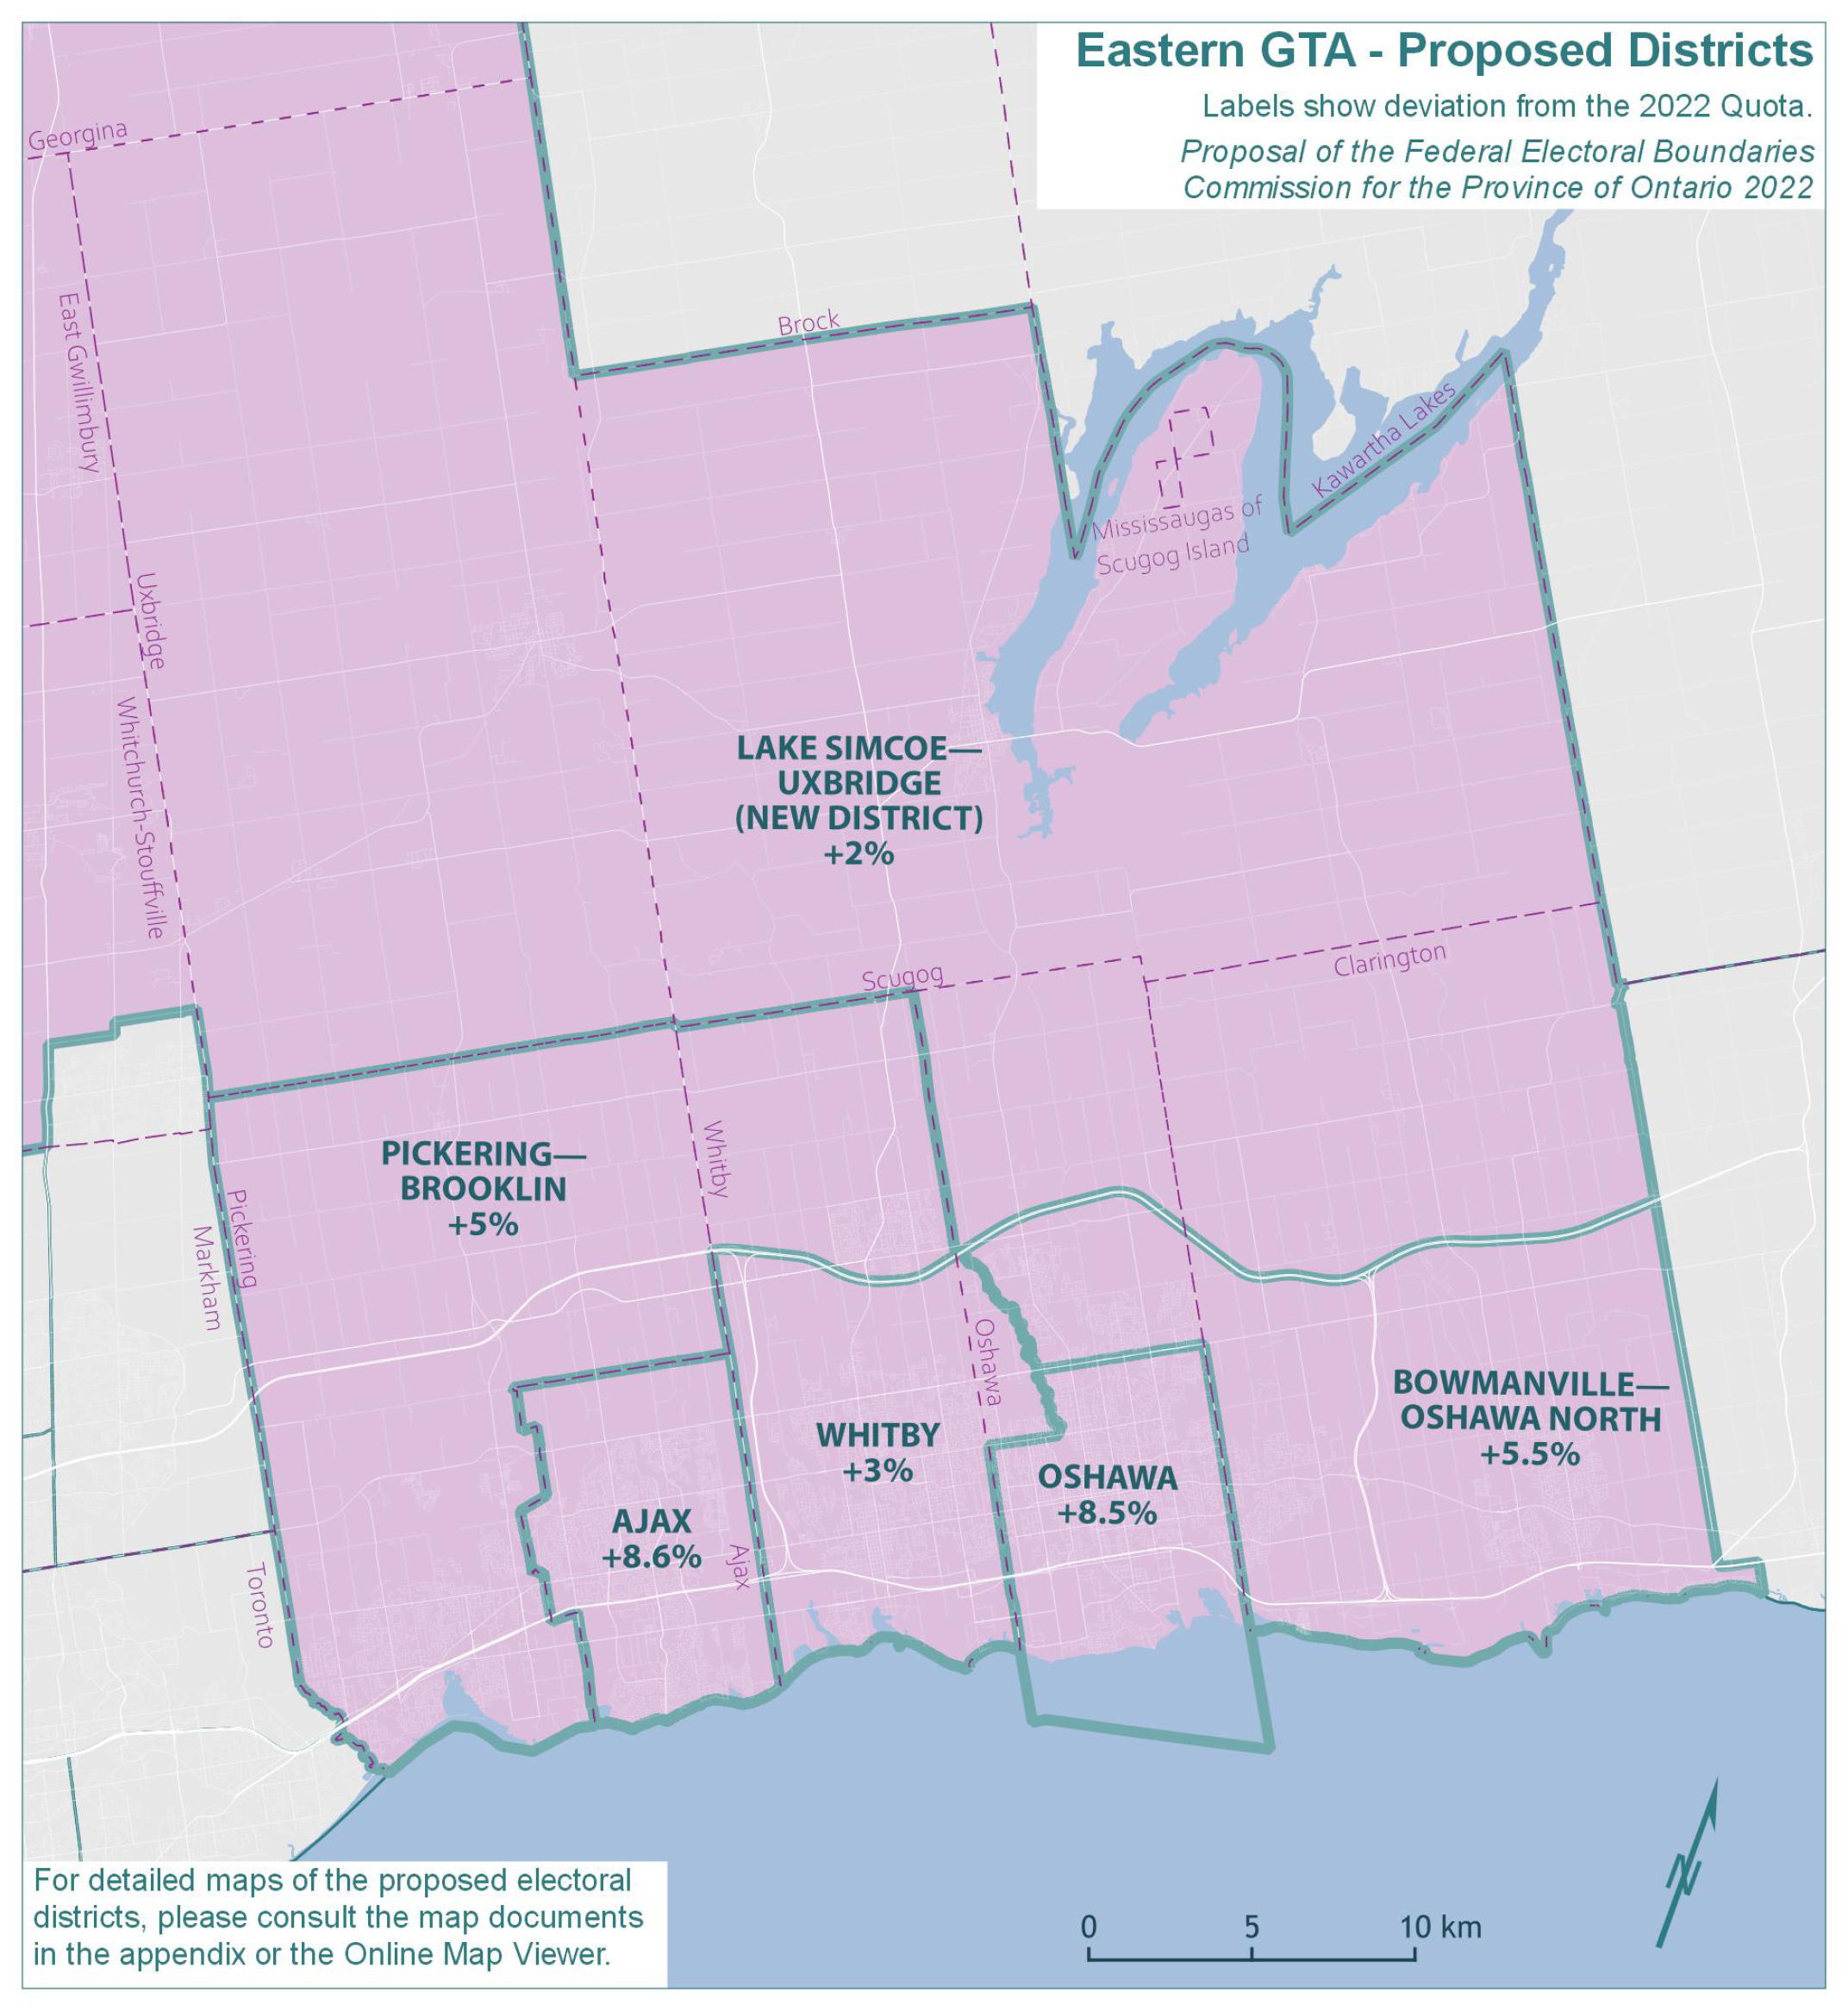 Eastern Greater Toronto Area - Proposed Districts 